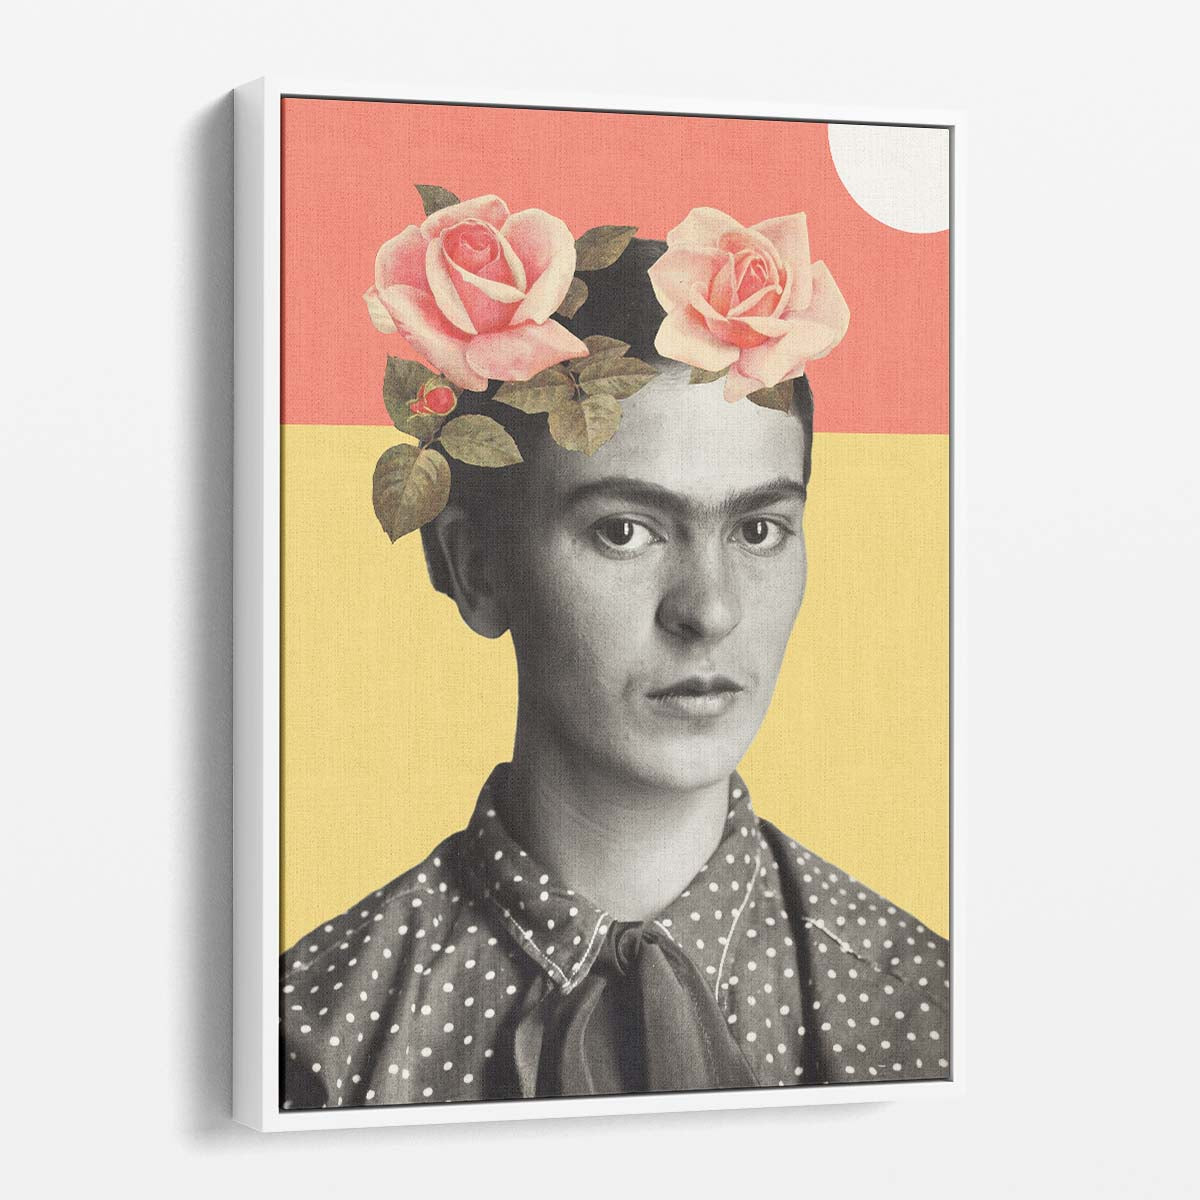 Colorful Frida Kahlo Portrait Illustration with Floral Montage by Luxuriance Designs, made in USA